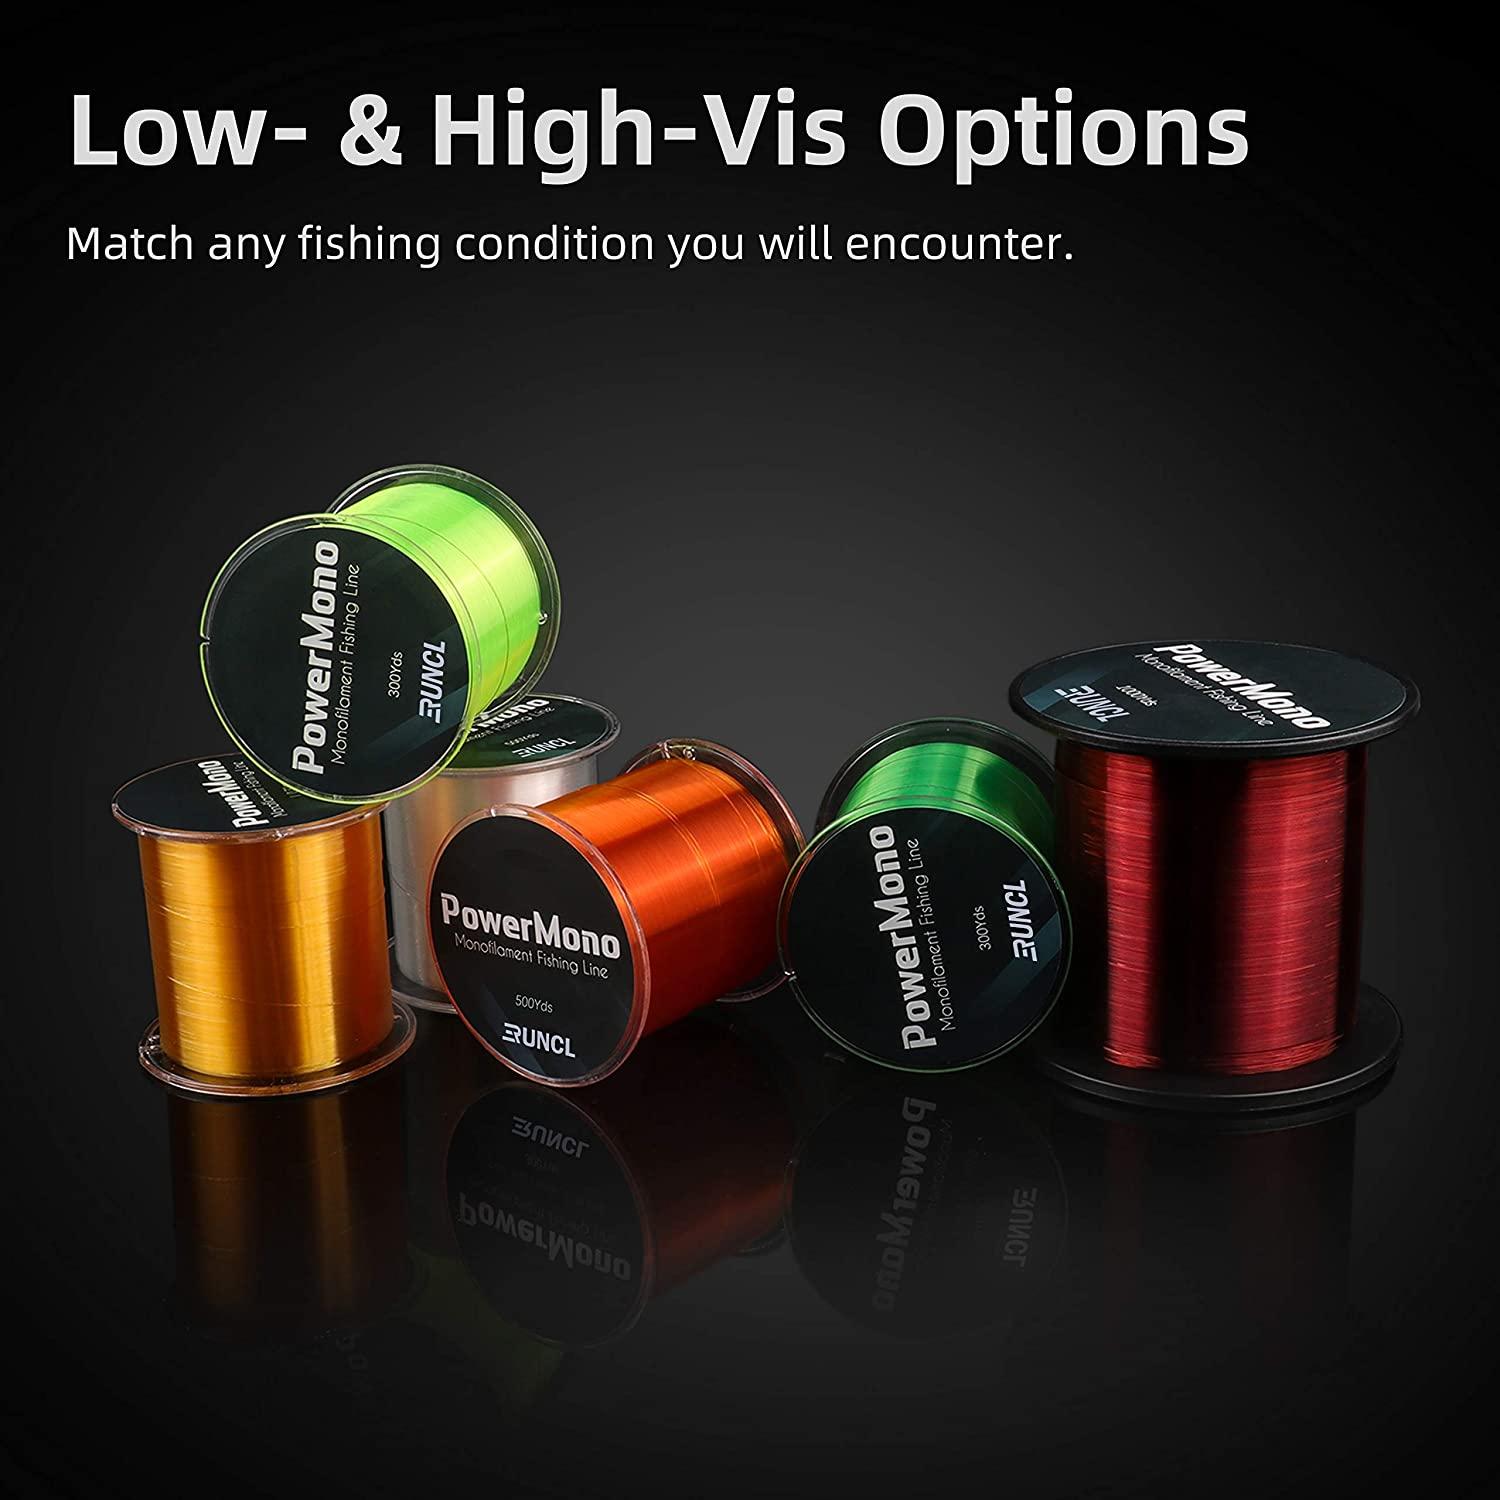 RUNCL PowerMono Fishing Line, Monofilament Fishing Line 300/500/1000Yds -  Ultimate Strength, Shock Absorber, Suspend in Water, Knot Friendly - Mono Fishing  Line 3-35LB, Low- & High-Vis Available A - Clear 6LB(2.7kgs)/0.20m